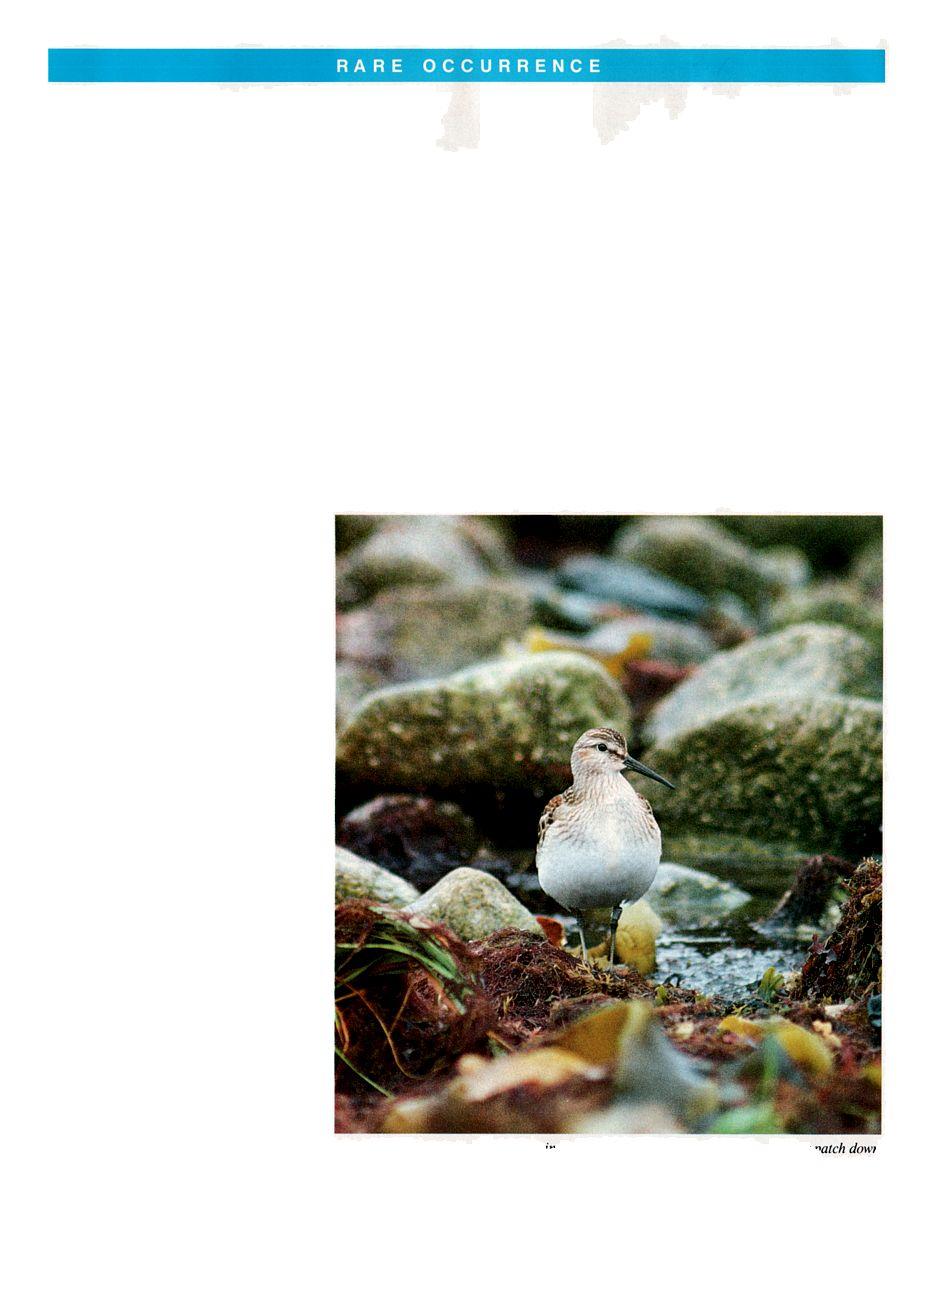 RARE OCCURRENCE Juvenile Cox's Sandpiper (CMidris paramelanotos in Massachusetts, a first New World occurrence and a hitherto undescribed plumage N SEPTEMBER 21, 1987, AT DUX- bury Beach in Plymouth,